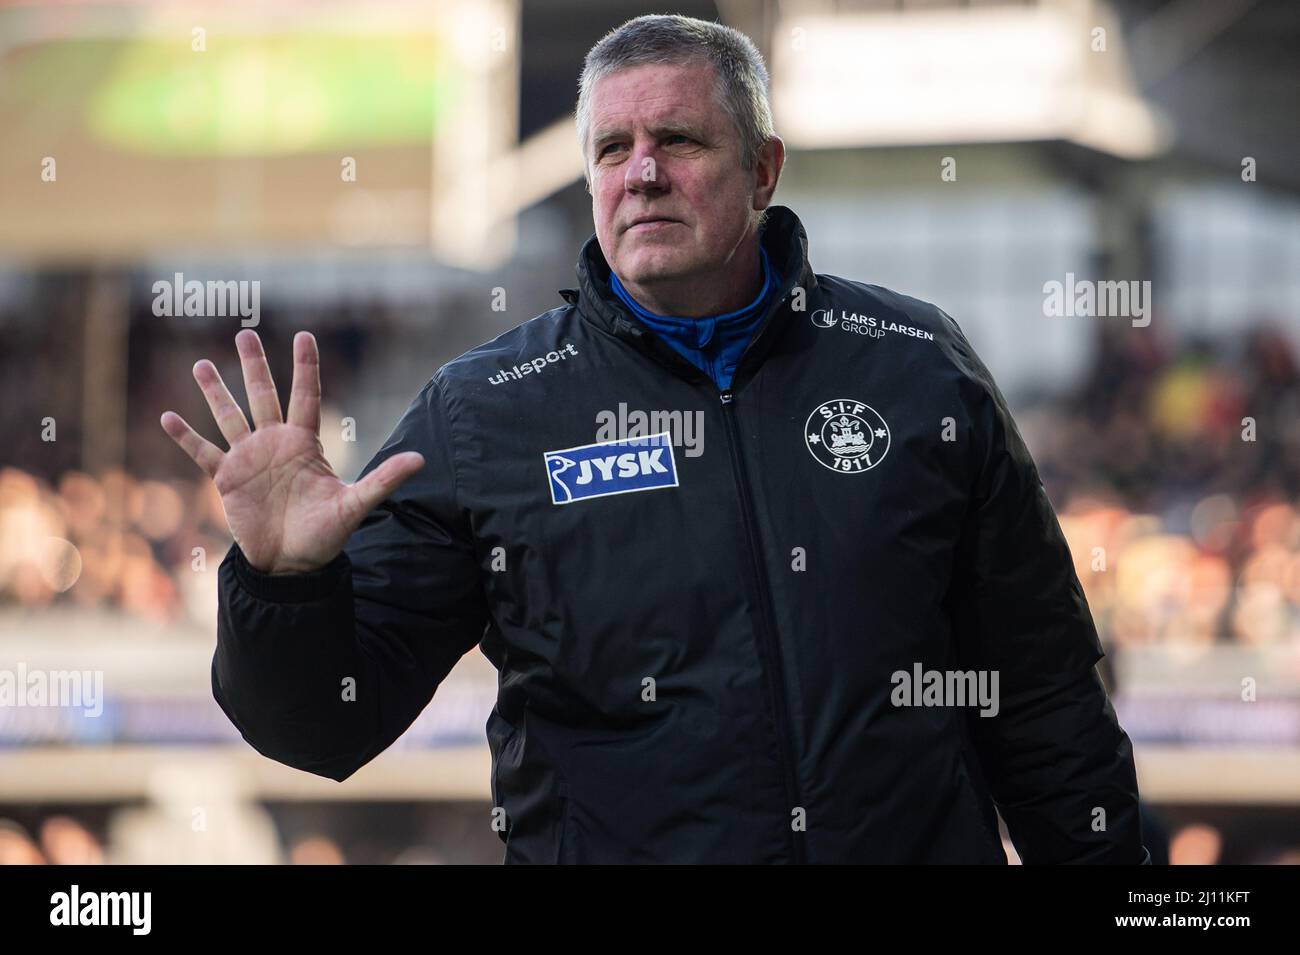 Silkeborg, Denmark. 20th, March 2022. Head coach Kent Nielsen of Silkeborg IF seen during the 3F Superliga match between Silkeborg IF and FC Midtjylland at Jysk Park in Silkeborg. (Photo credit: Gonzales Photo - Morten Kjaer). Stock Photo